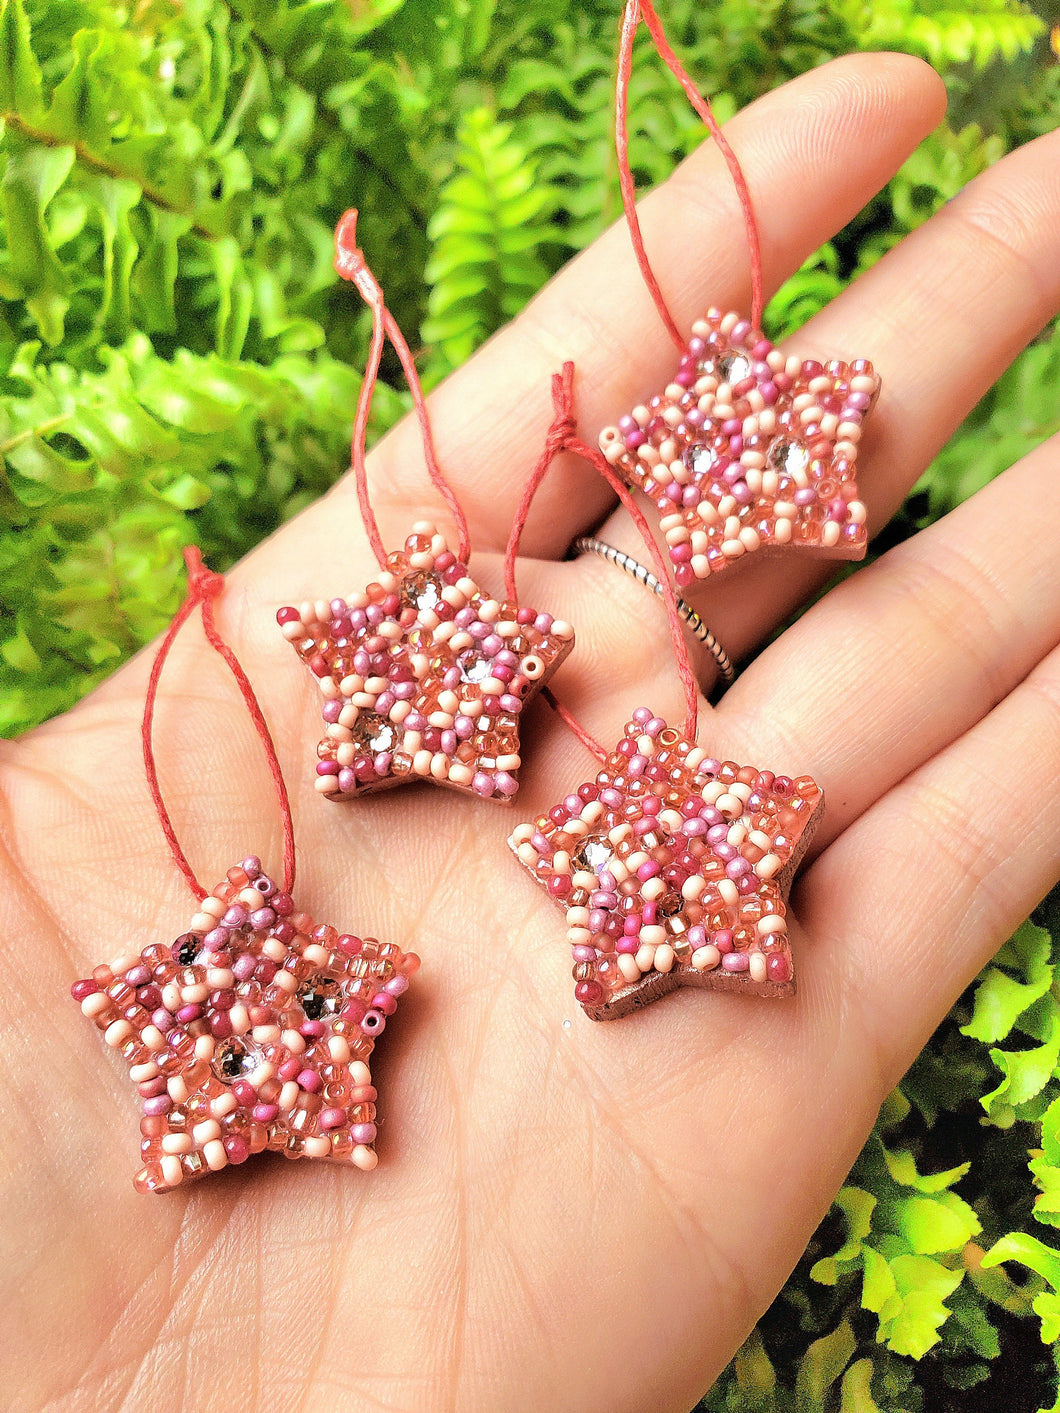 Dusty Pink Star Ornaments, Gift Set, CottageCore Decor, Mini Ornaments, Unique Gift, Stocking Stuffer for Her, Rose Christmas Decor